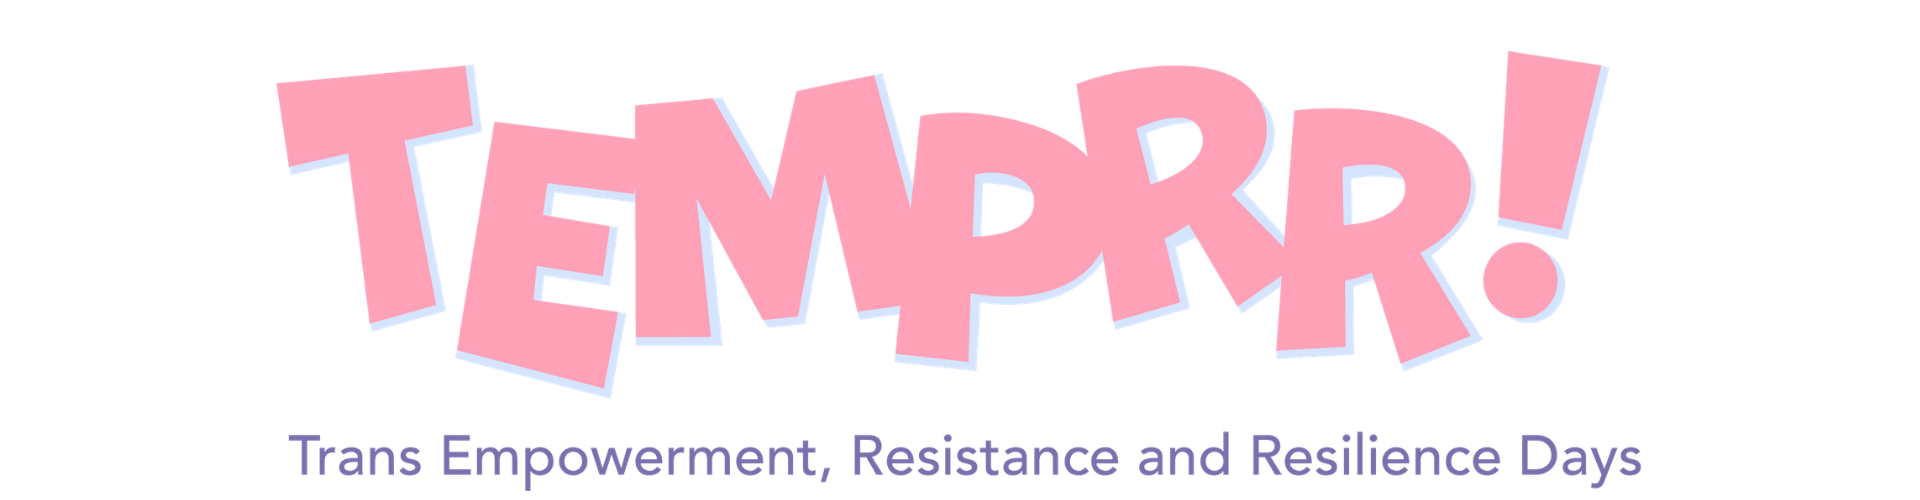 Light pink text with a light blue shadow that reads TEMPRR